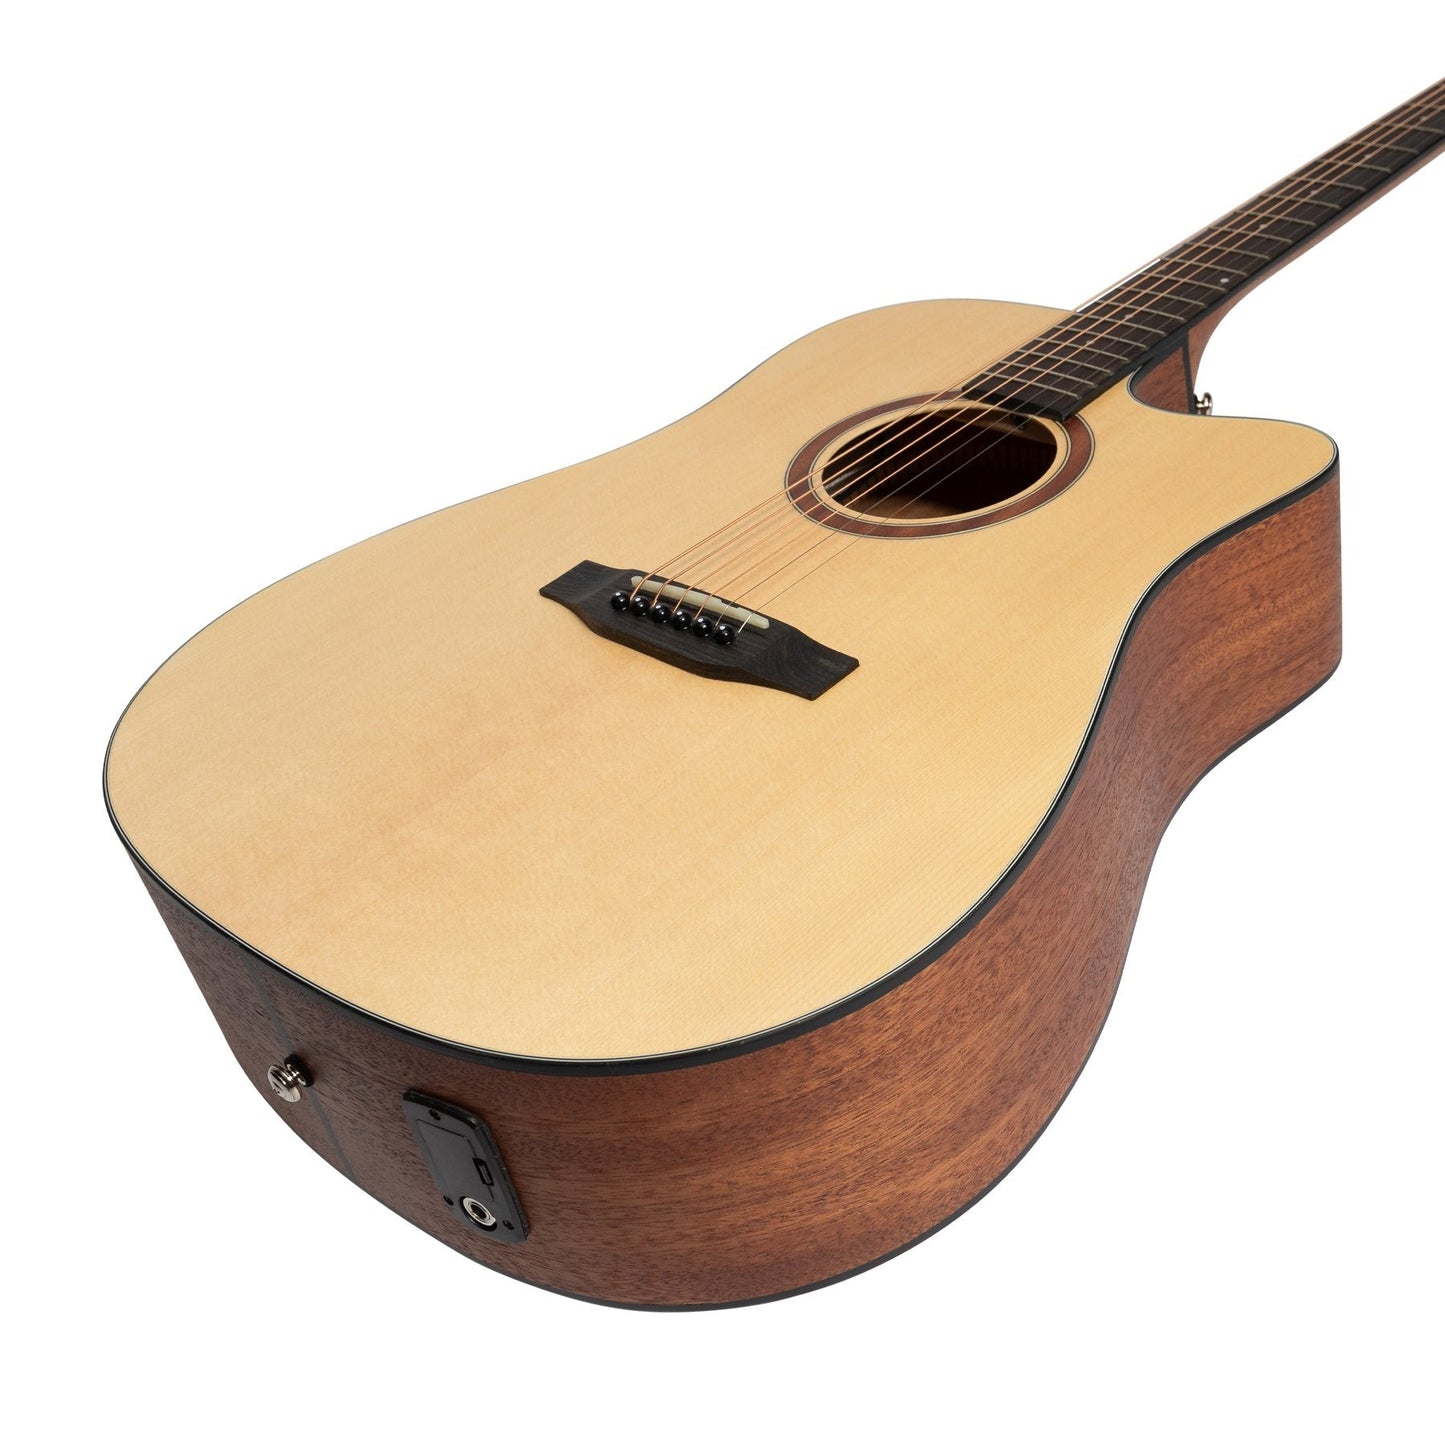 Martinez 'Natural Series' Spruce Top Acoustic-Electric Dreadnought Cutaway Guitar (Open Pore)